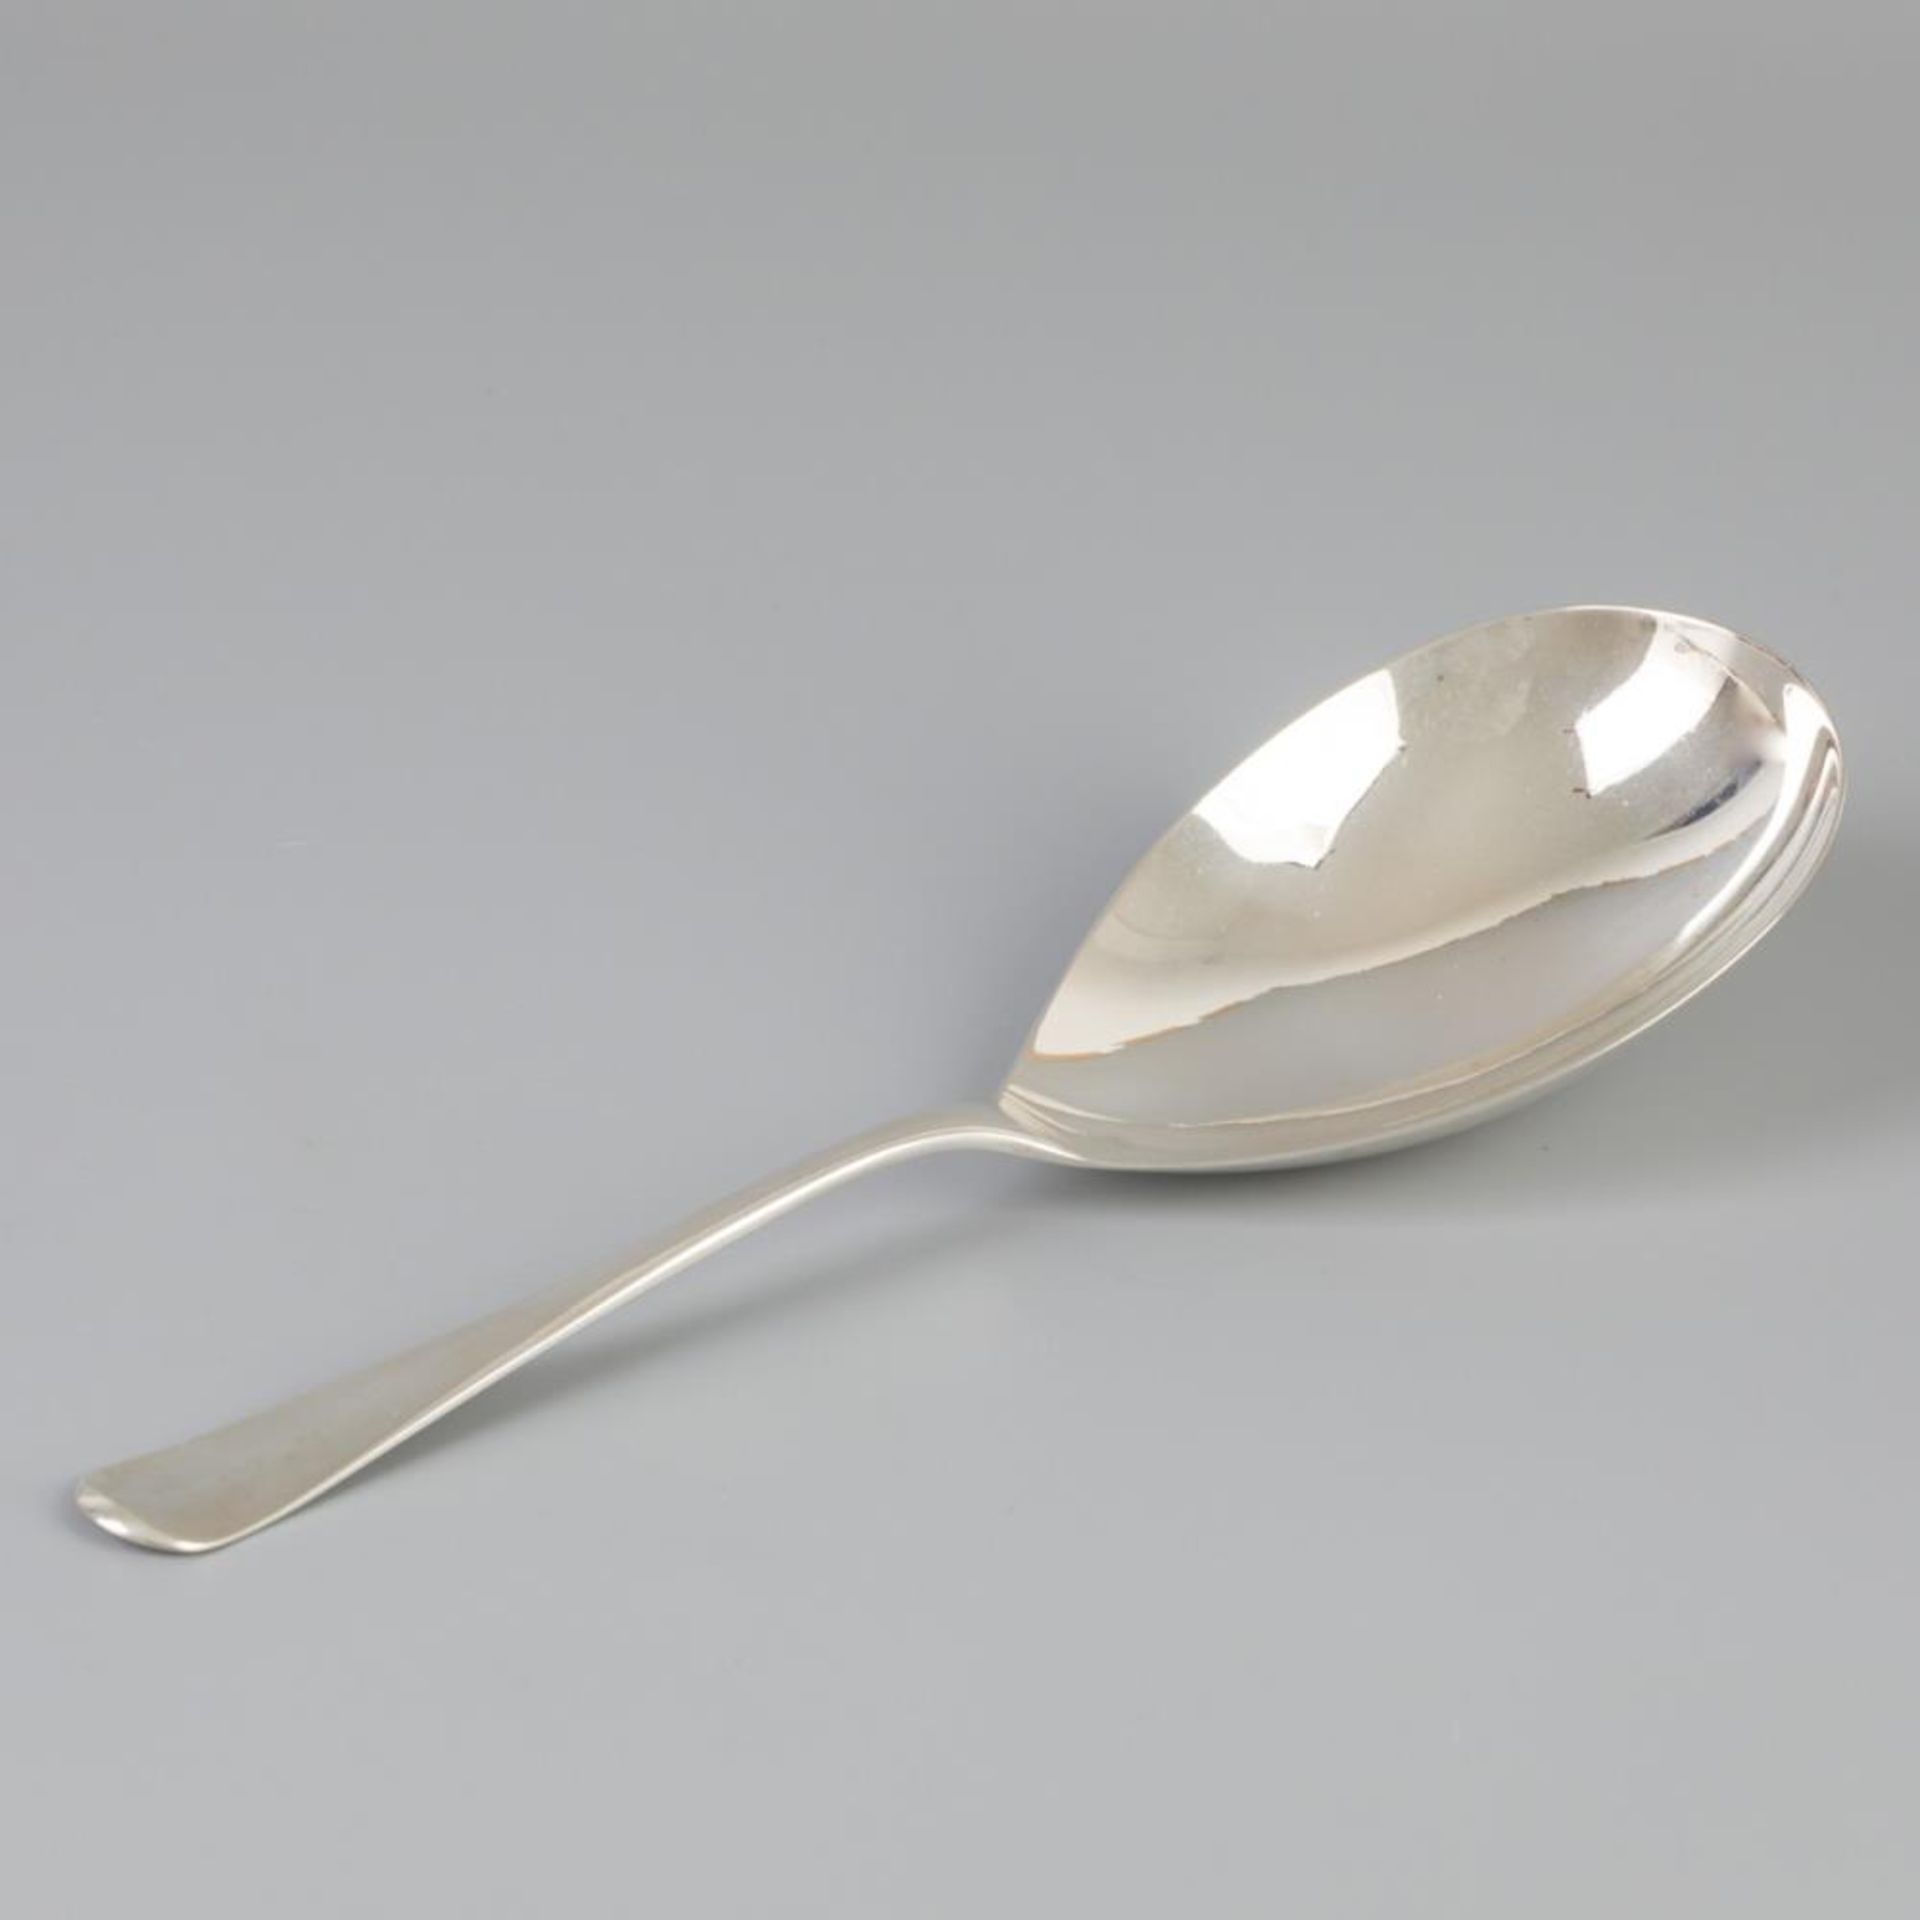 Rice spoon silver.